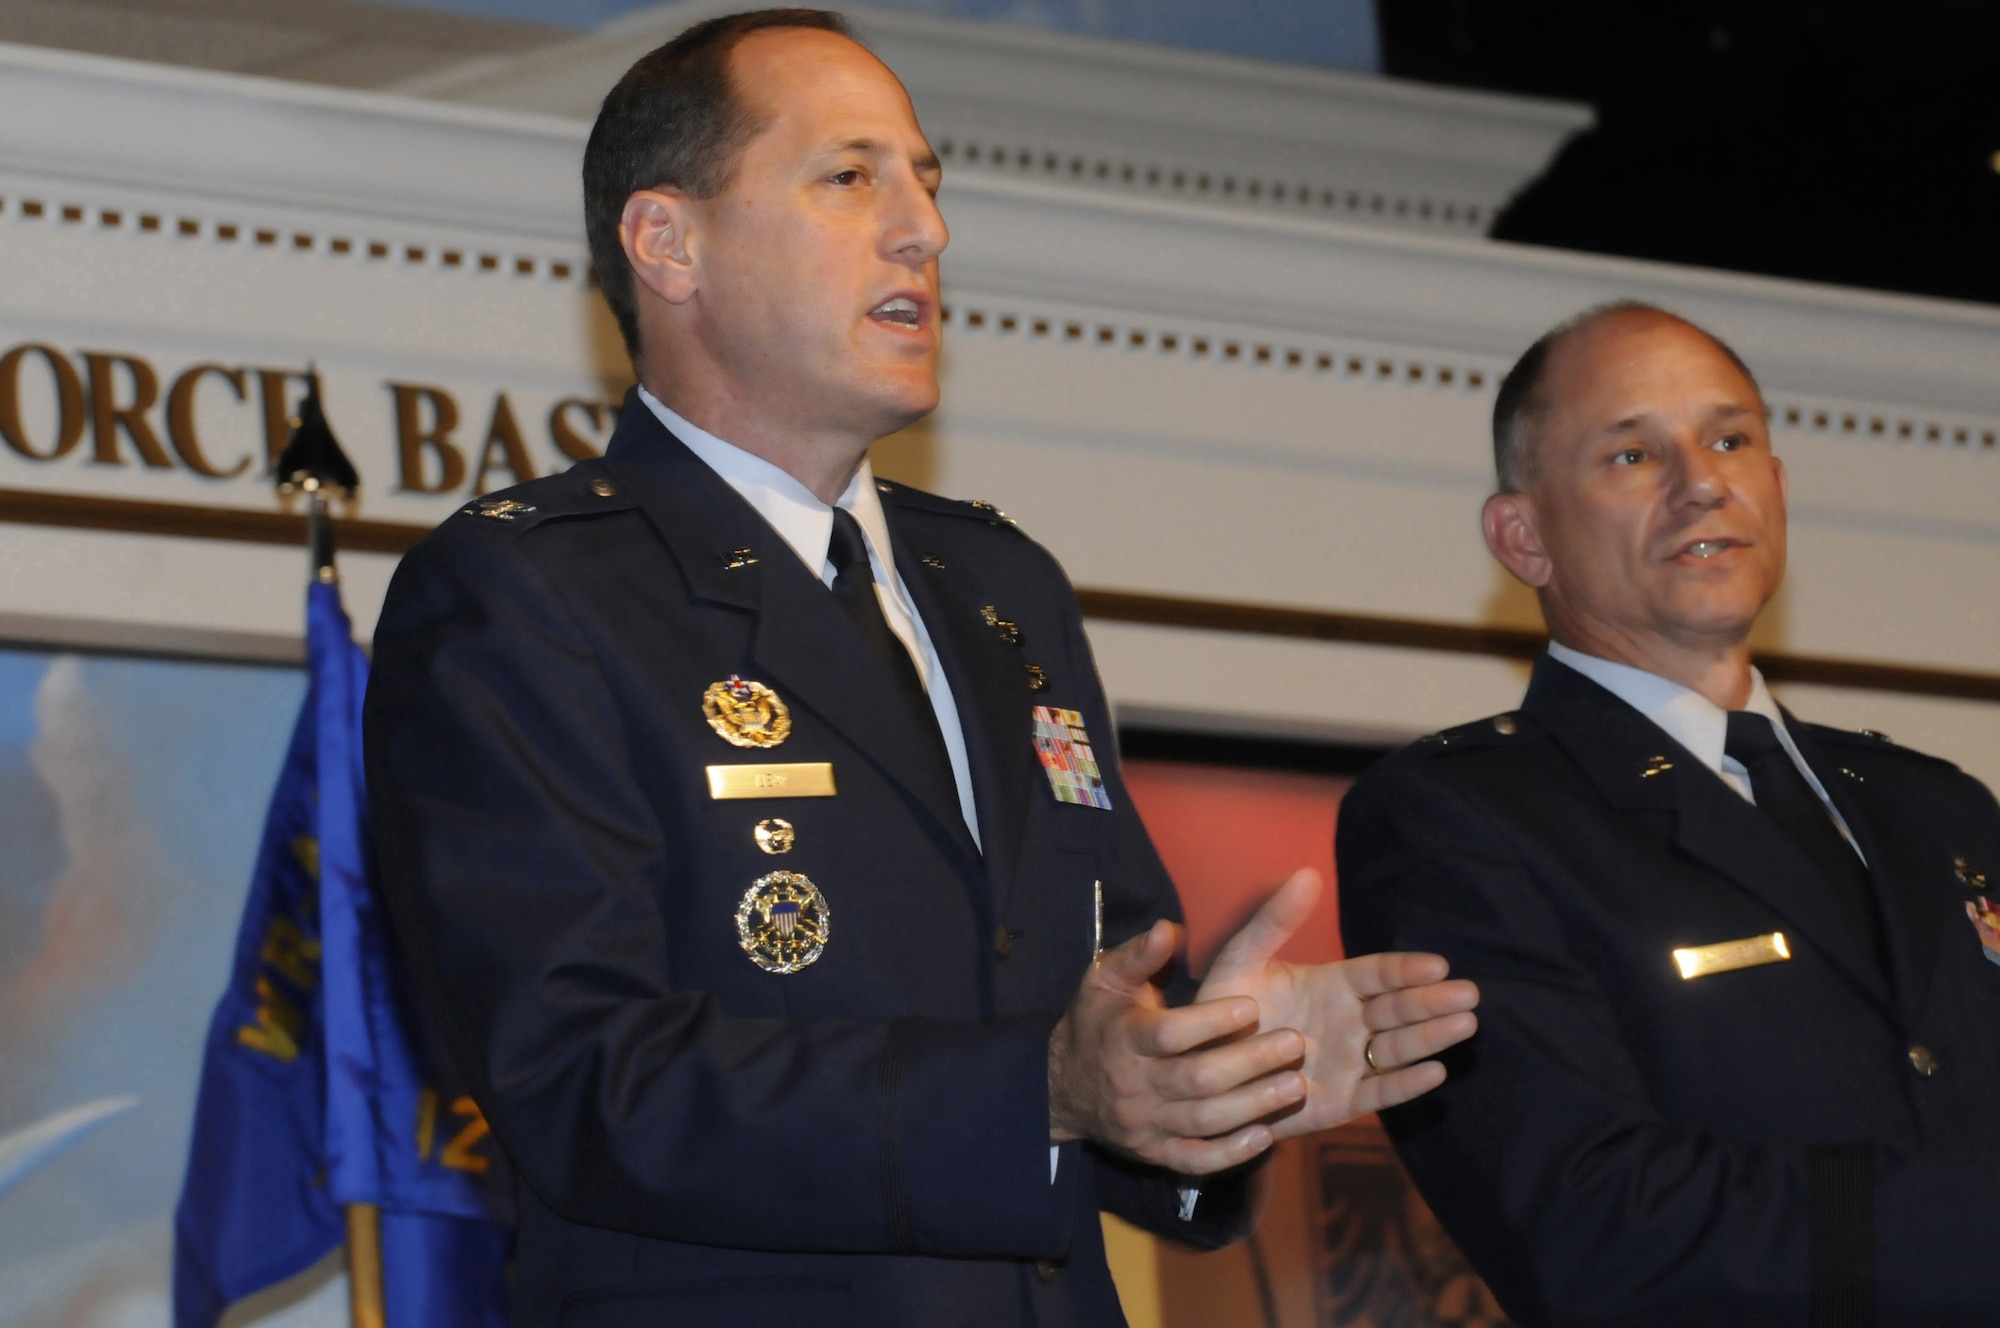 Colonel Lee K. Levy, II, new 402nd Maintenance Wing commander sings the Air Force song along with Brig. Gen. Mark A. Atkinson, former commander, at the change of command ceremony. U. S. Air Force photo by Sue Sapp